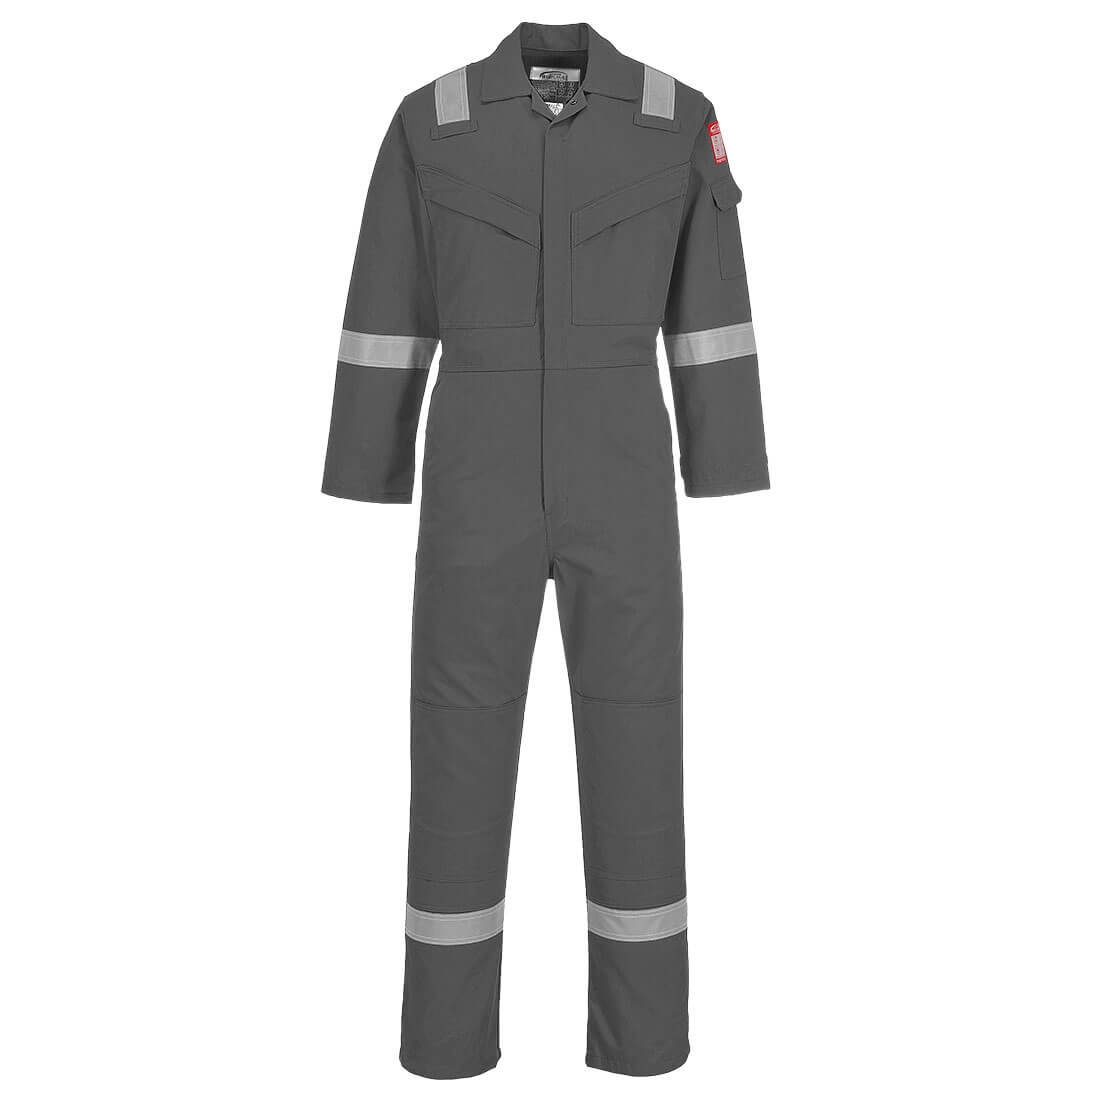 Image of Biz Flame Mens Aberdeen Flame Resistant Antistatic Coverall Grey 2XL 32"